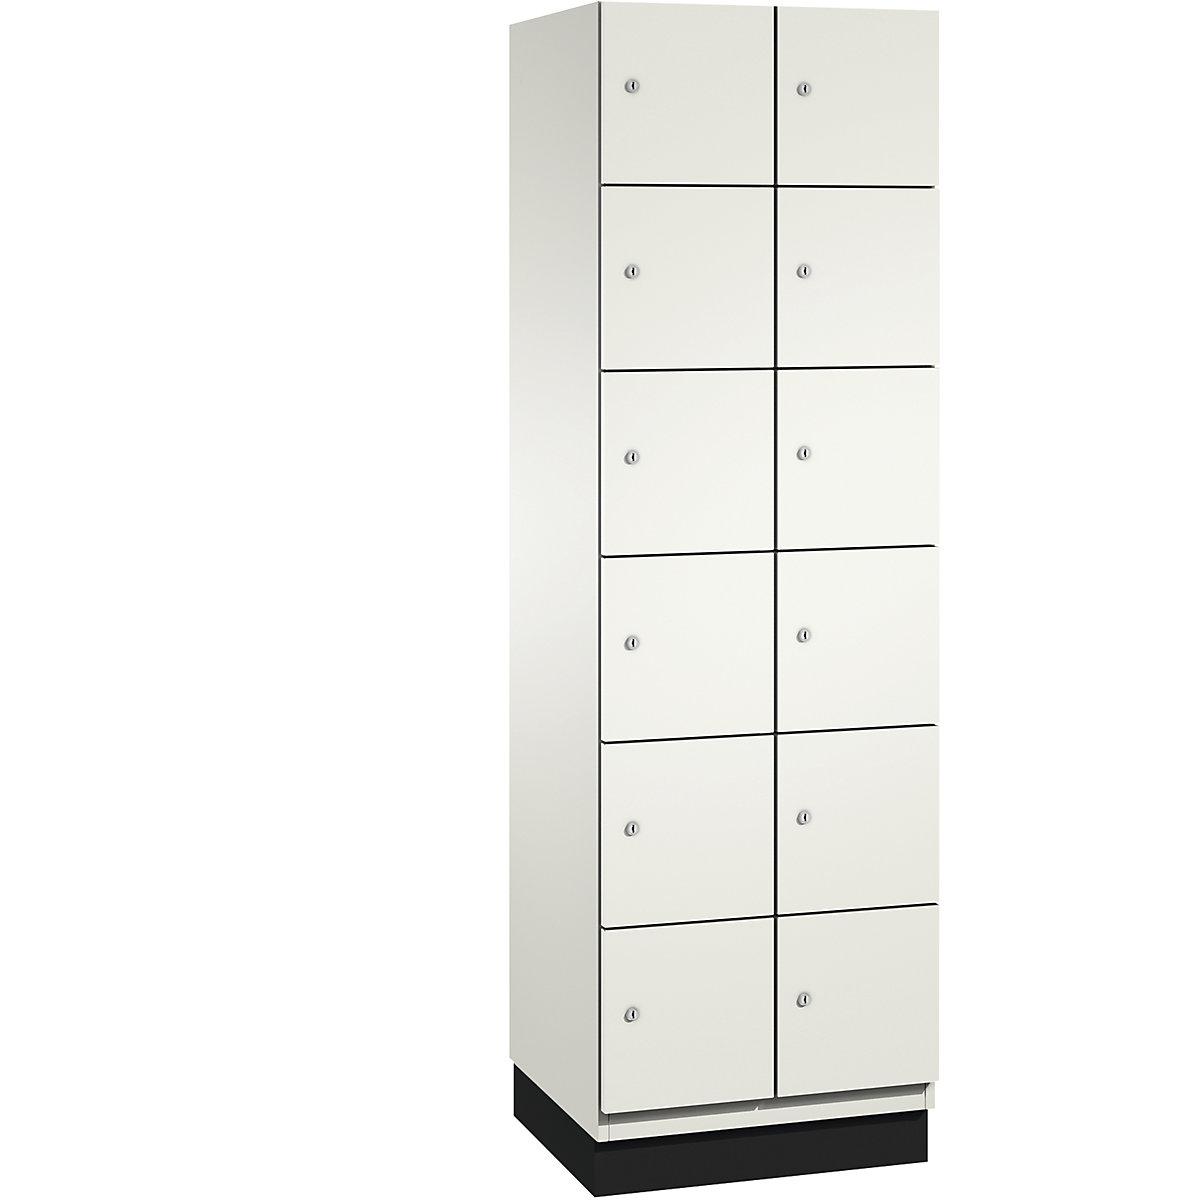 CAMBIO compartment locker with sheet steel doors – C+P, 12 compartments, width 600 mm, body pure white / door pure white-6